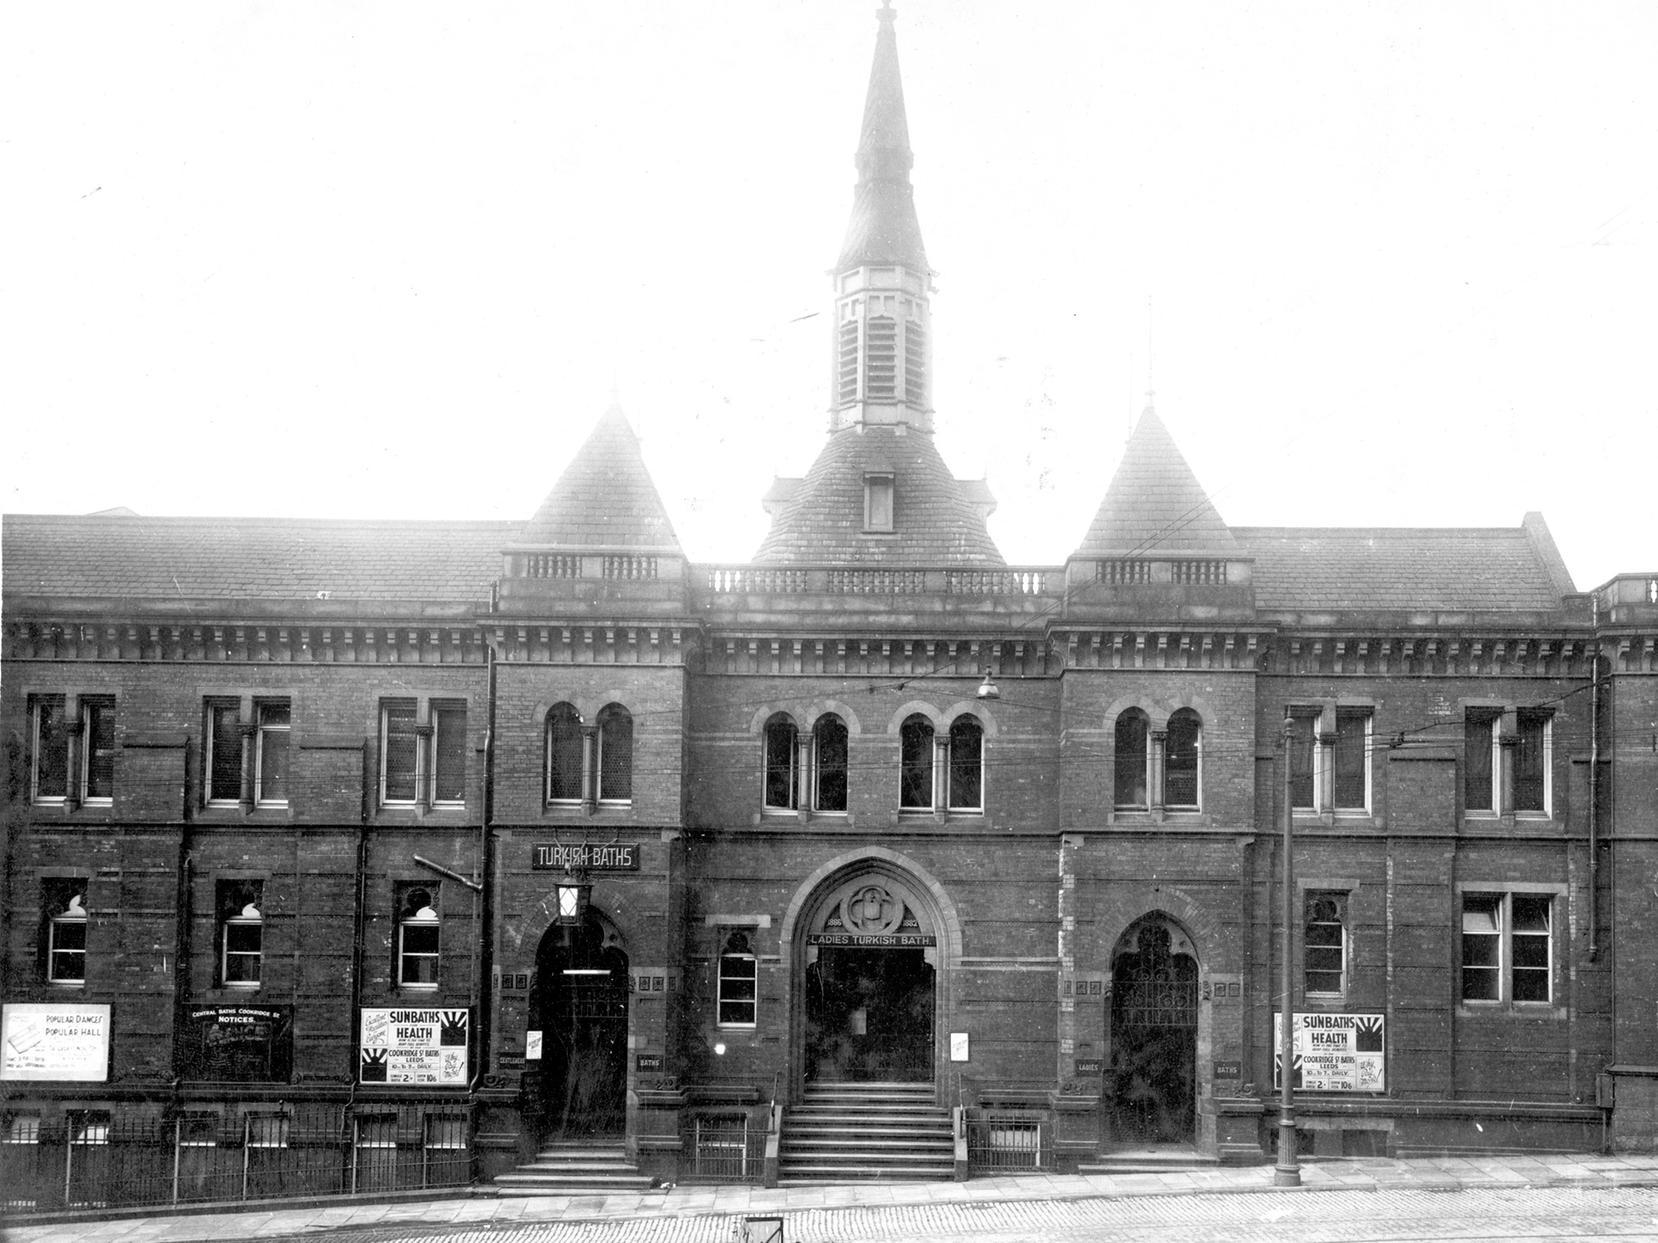 Cookridge Street Baths in Leeds city centre. The site is now part of Millennium Square. This view shows central entrance with notice for 'Ladies Turkish Bath'. Separate entrances for men on the right, and women on the left.